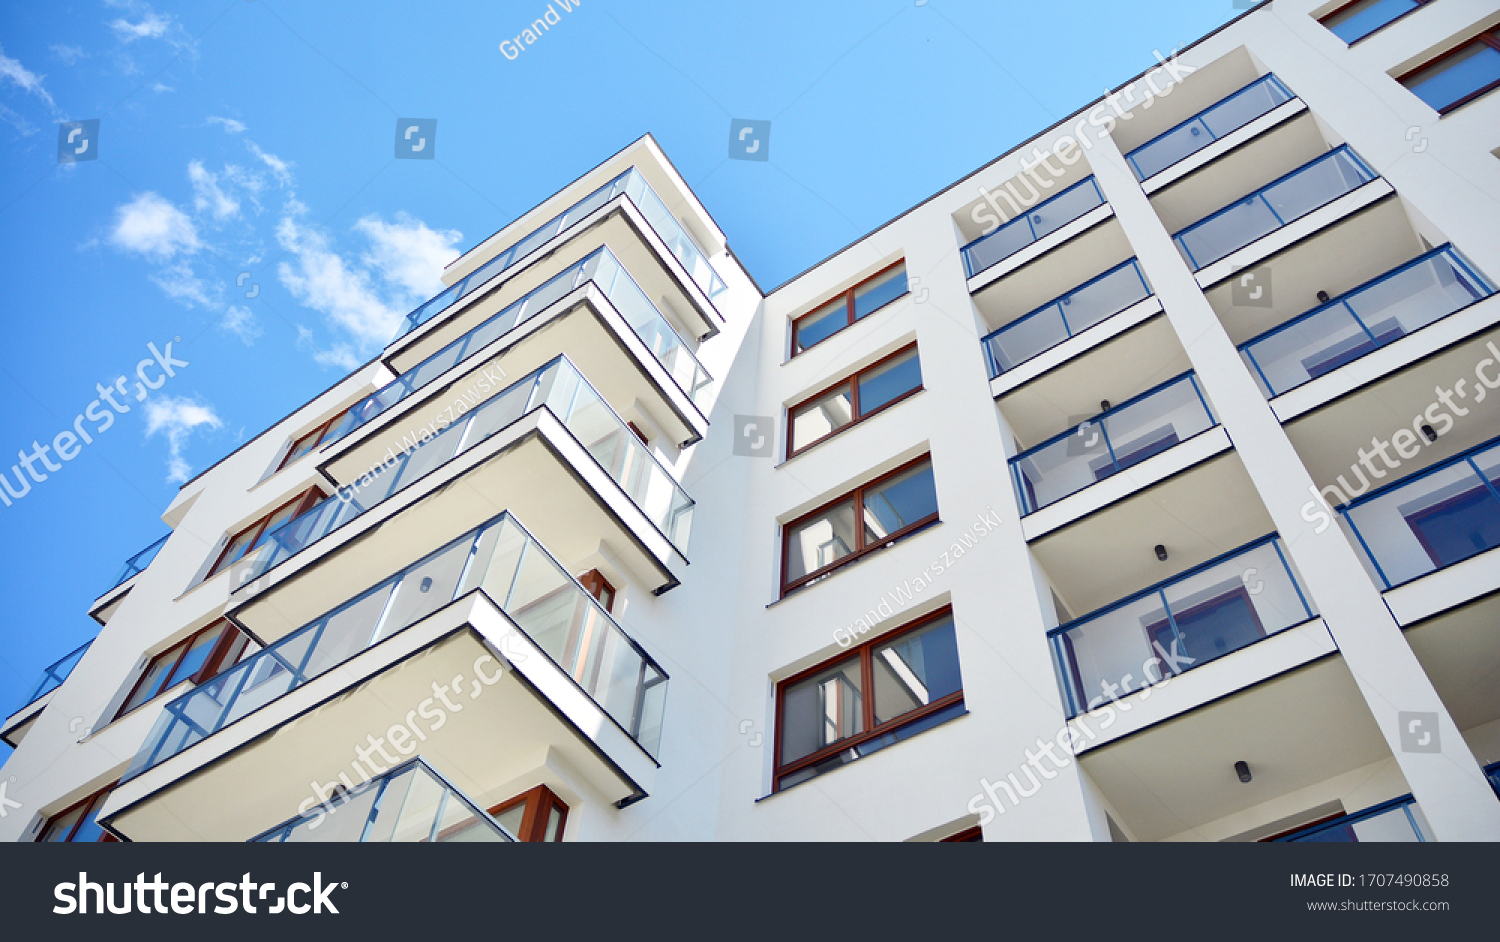 Modern and new apartment building. Multistoried modern, new and stylish living block of flats. #1707490858